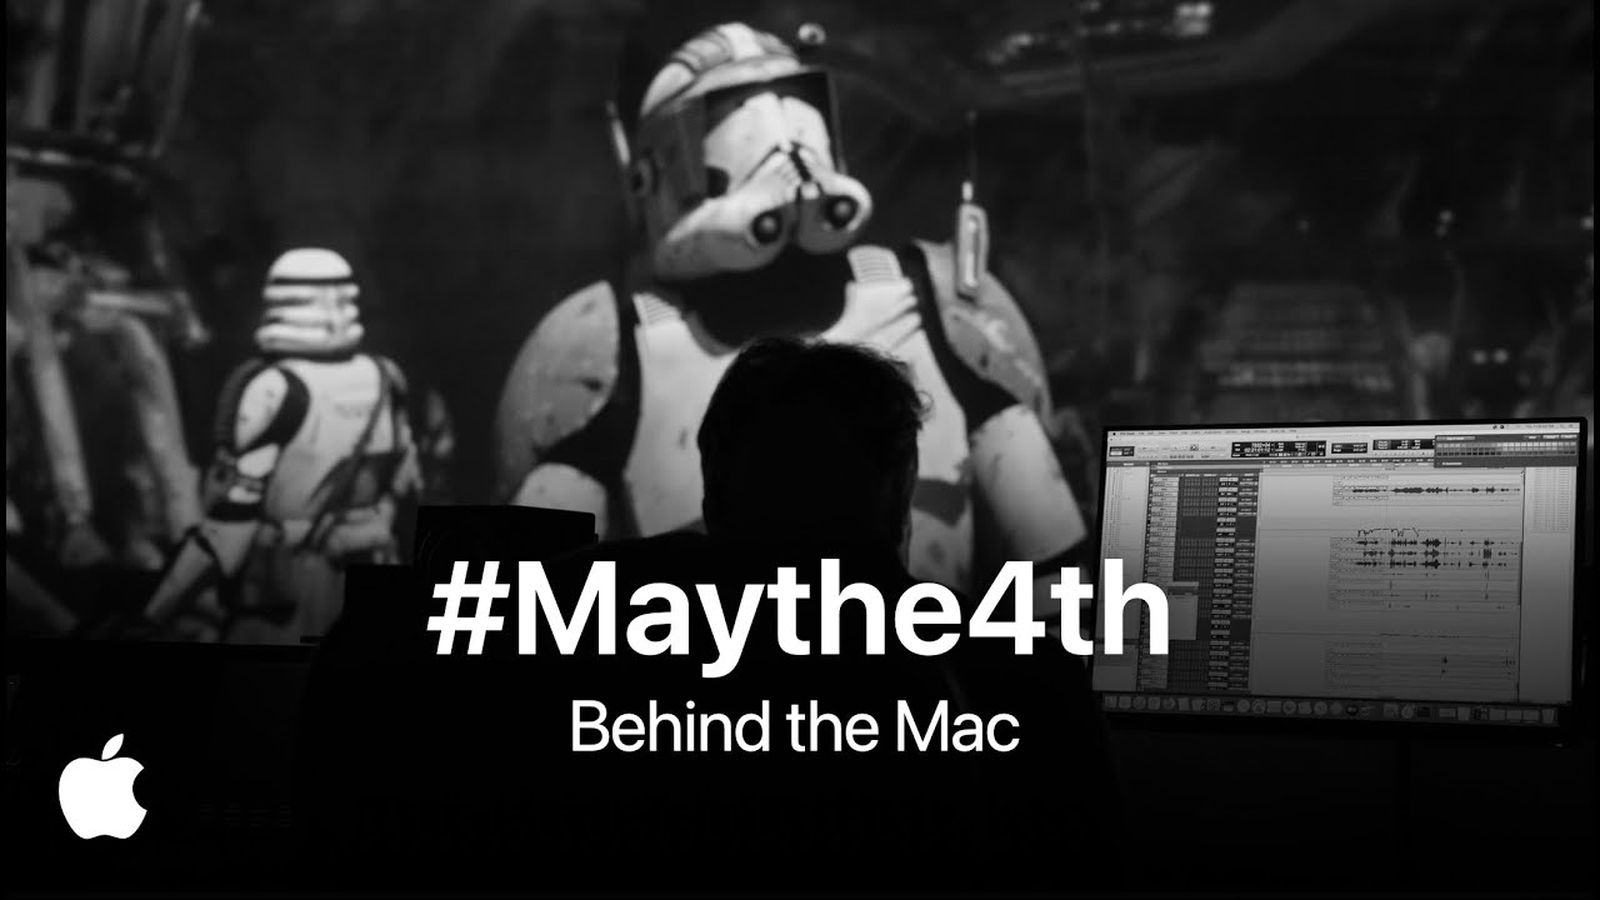 Apple Teases Star Wars-Themed ‘Behind the Mac’ Film Featuring Skywalker Sound